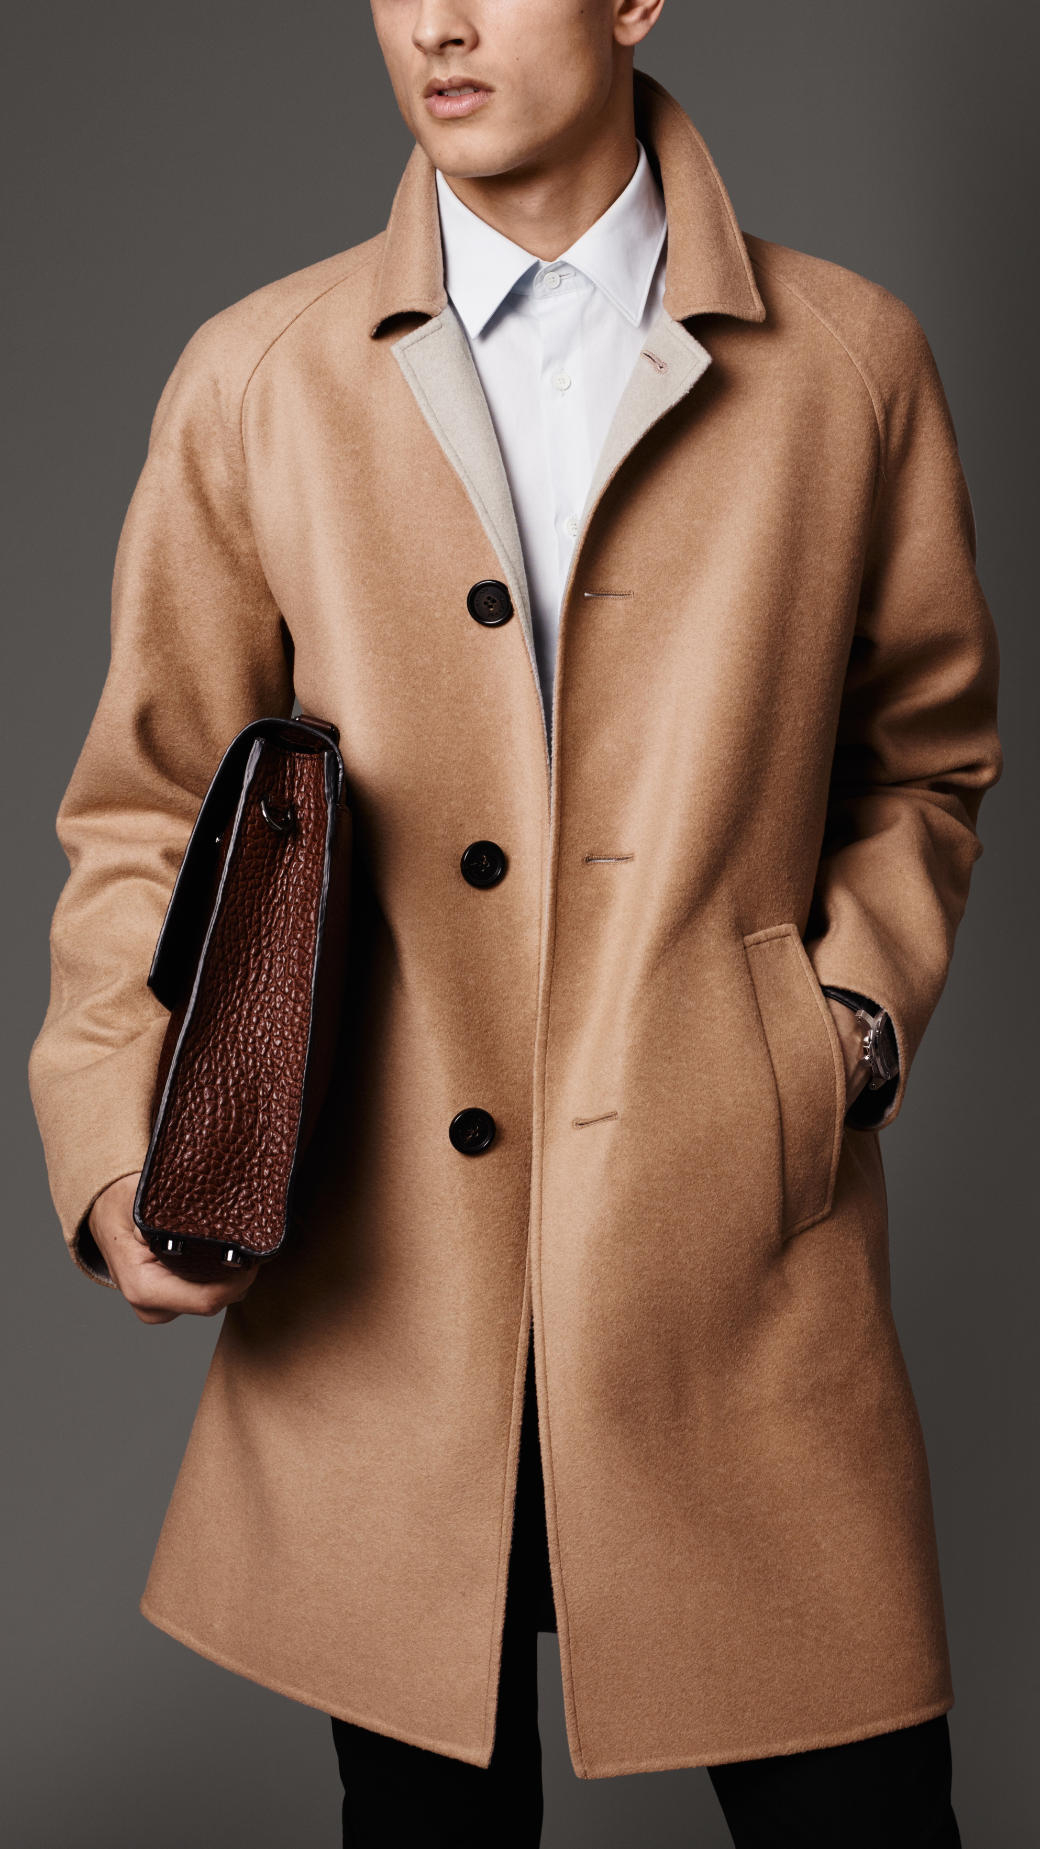 Burberry Double Cashmere Car Coat in Camel (Brown) for Men - Lyst